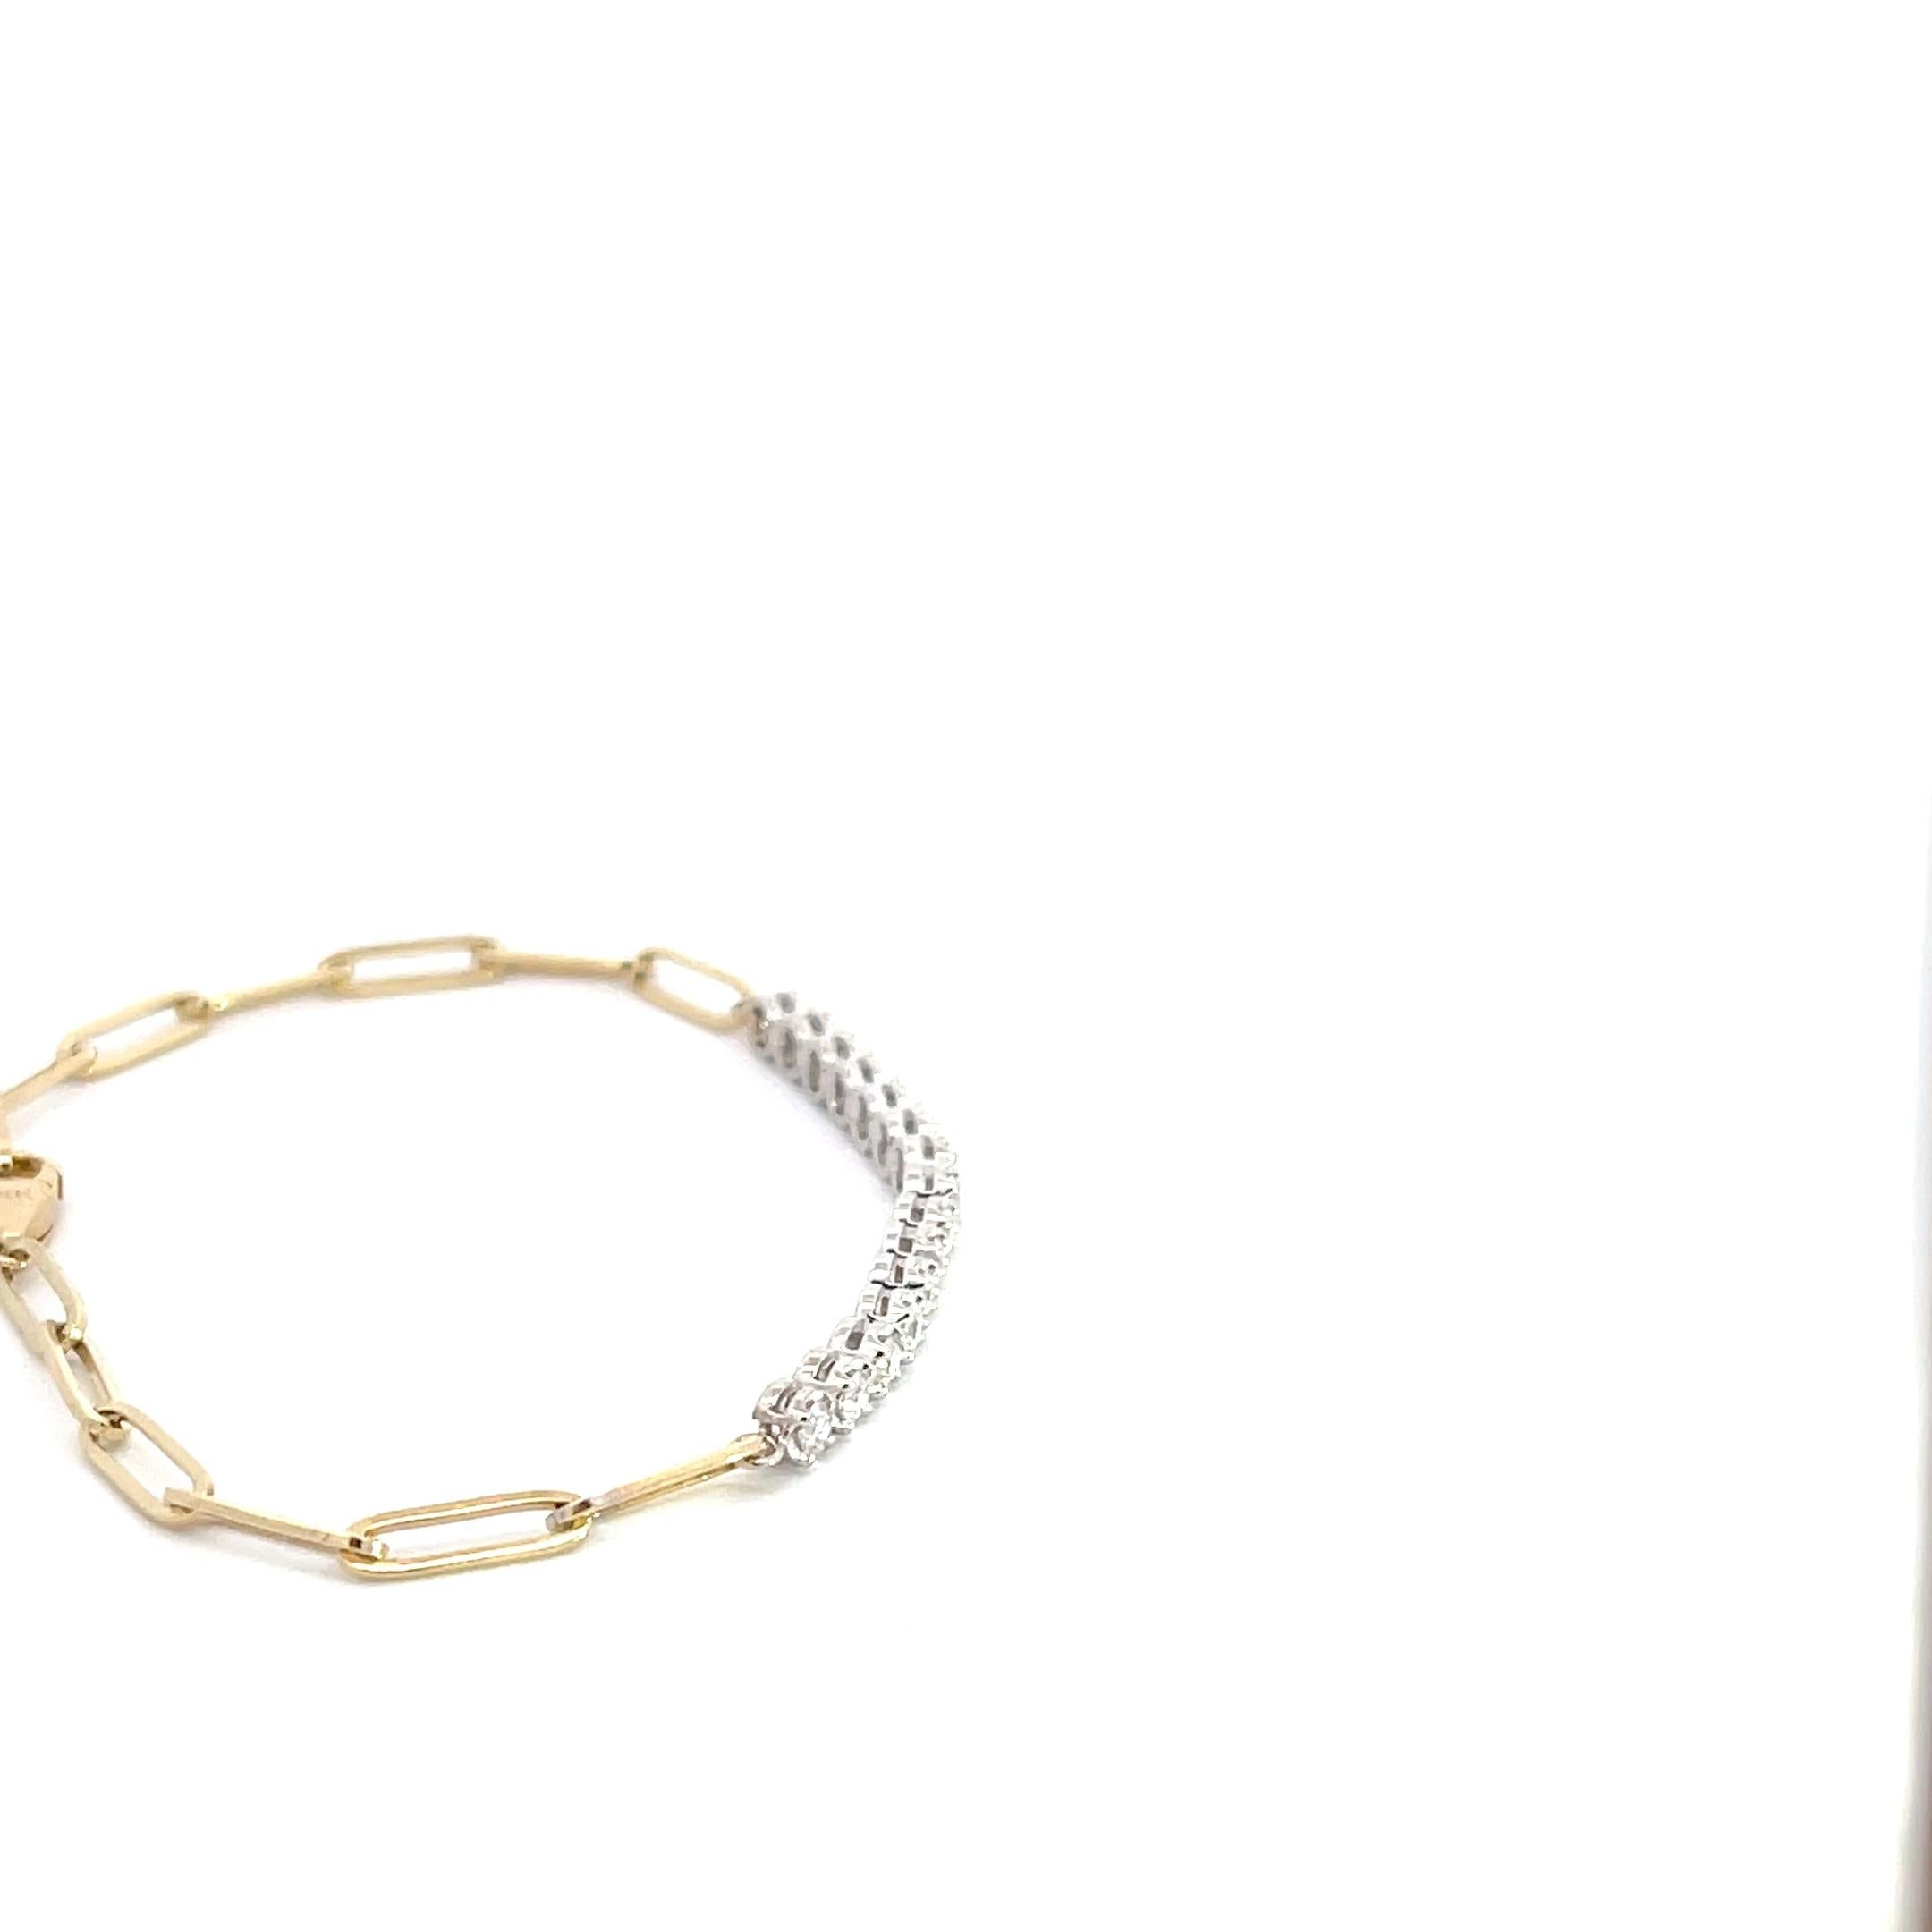 Introducing our stunning 14K Yellow & White Gold 3/4ctw Diamond Paper Clip Bracelet, a harmonious blend of elegance and modernity. Crafted with exquisite precision, this bracelet is a true testament to the brilliance of fine jewelry.

The bracelet